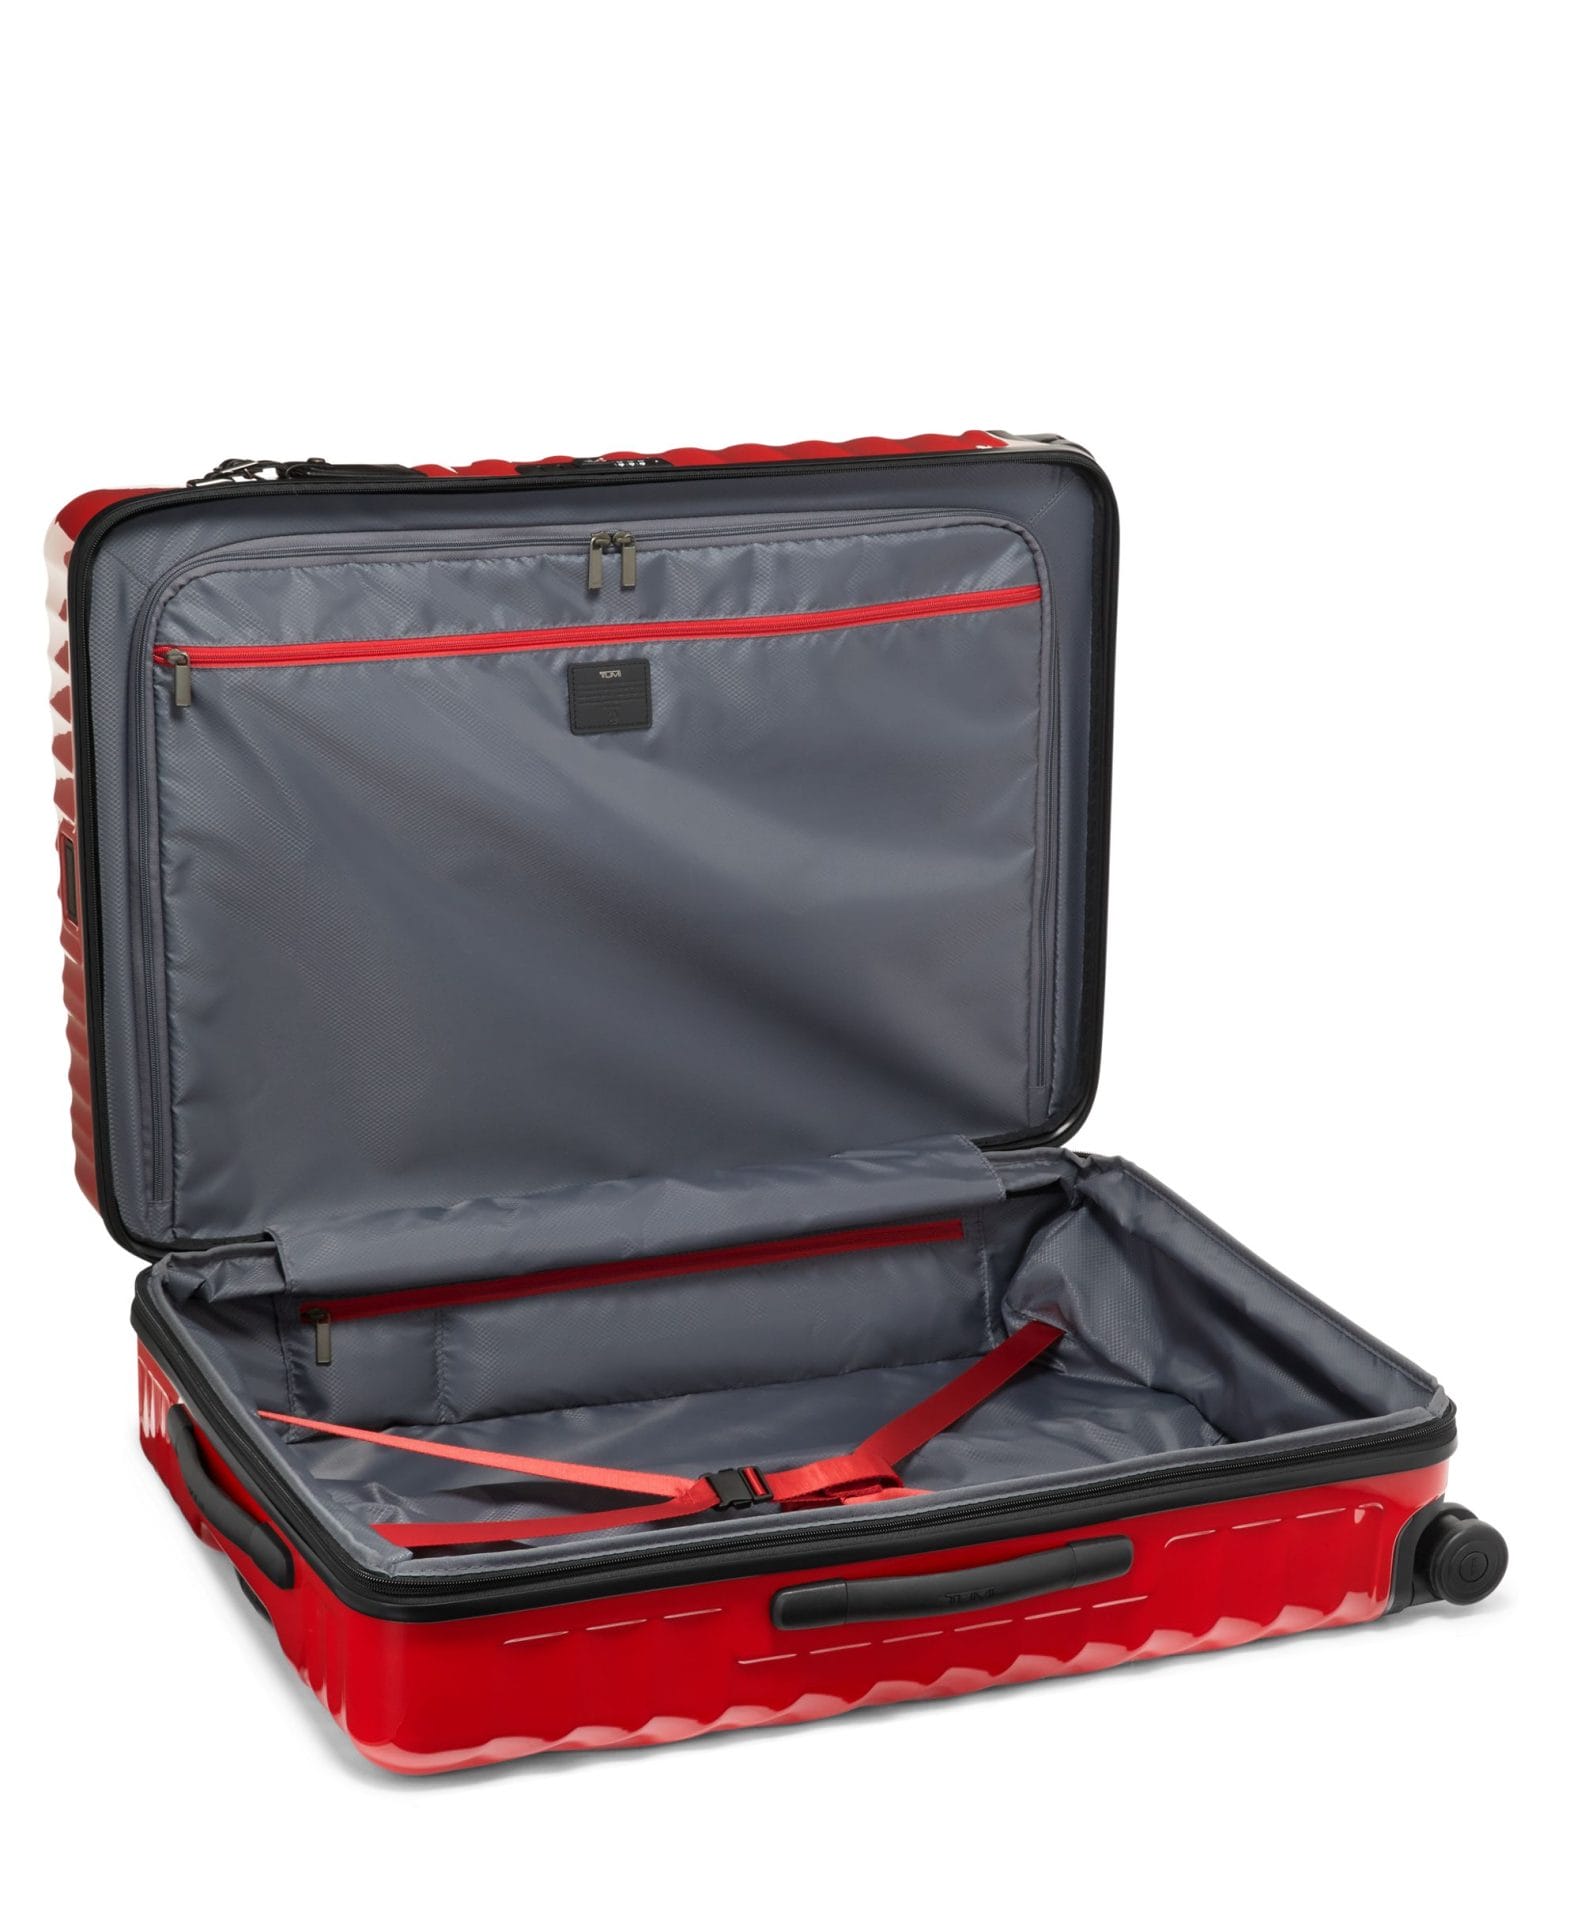 Tumi 19 Degree Extended Trip Expandable 4 Wheeled Packing Case - Blaze Red  - Irv's Luggage